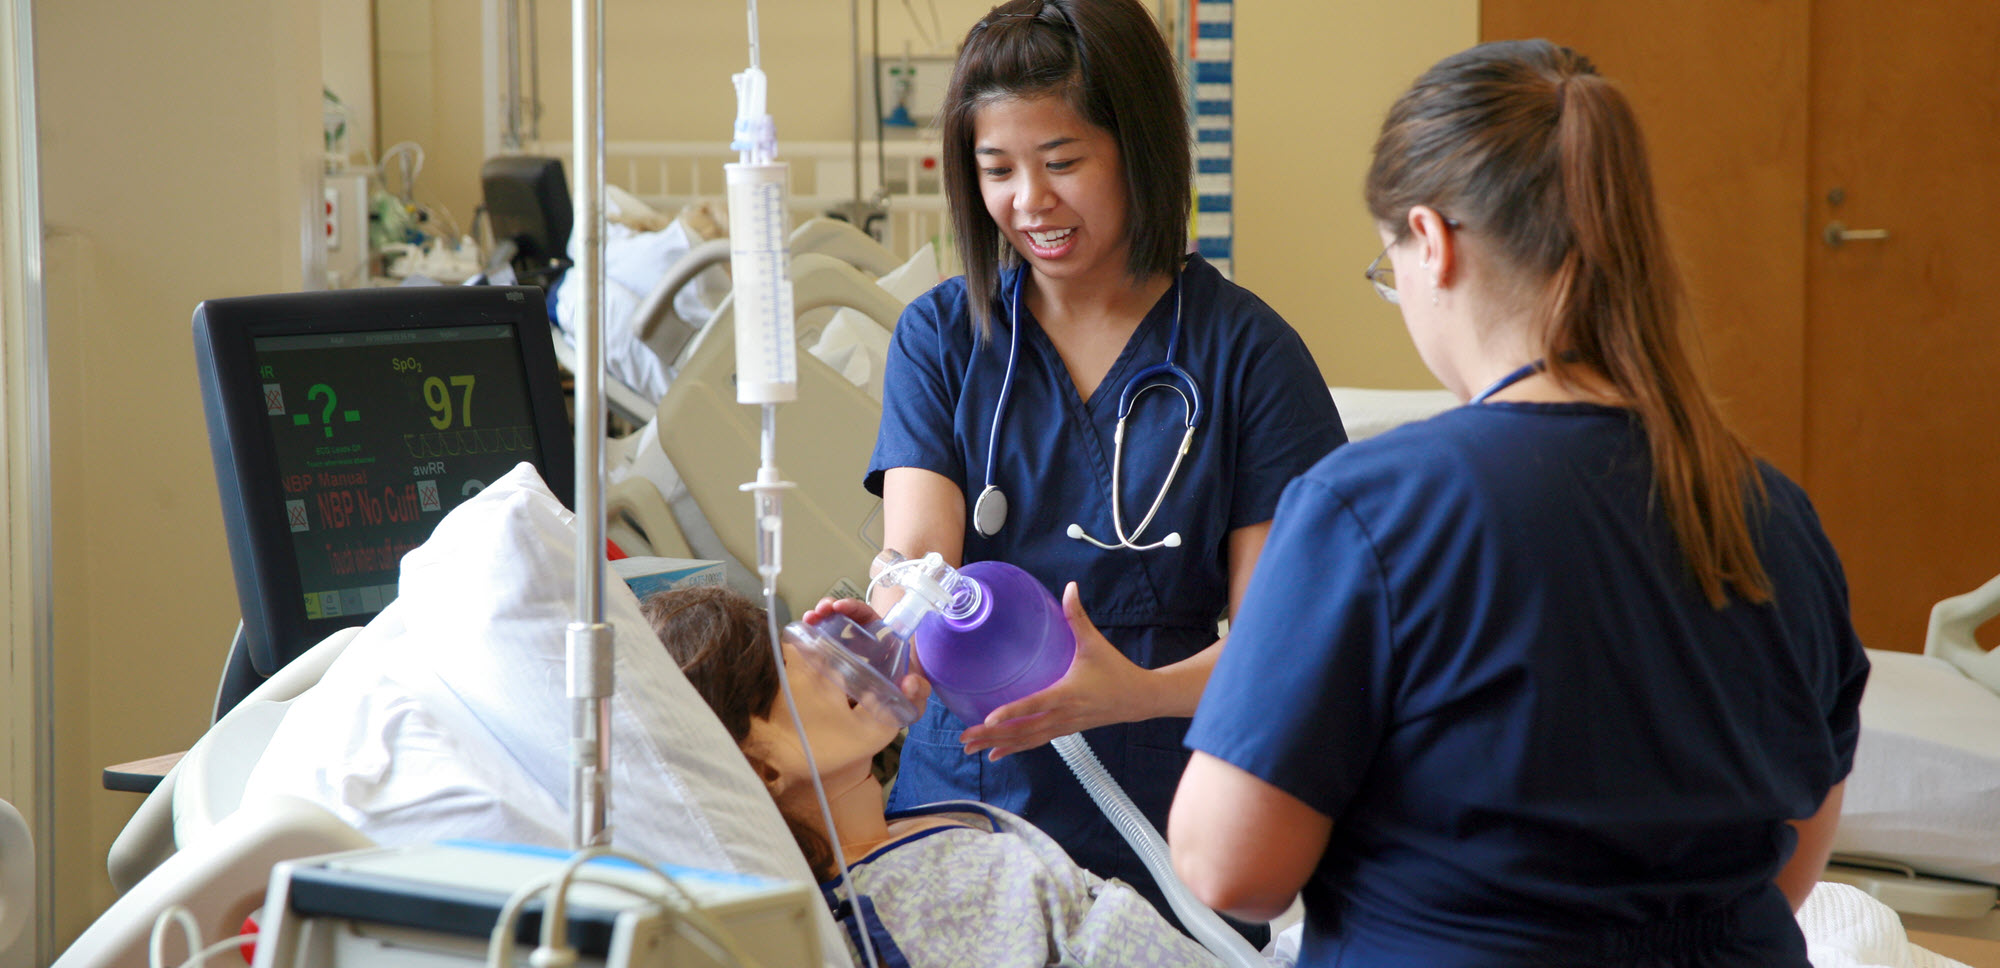 Two nursing students in scrubs practice skills on a dummy during a simulation..